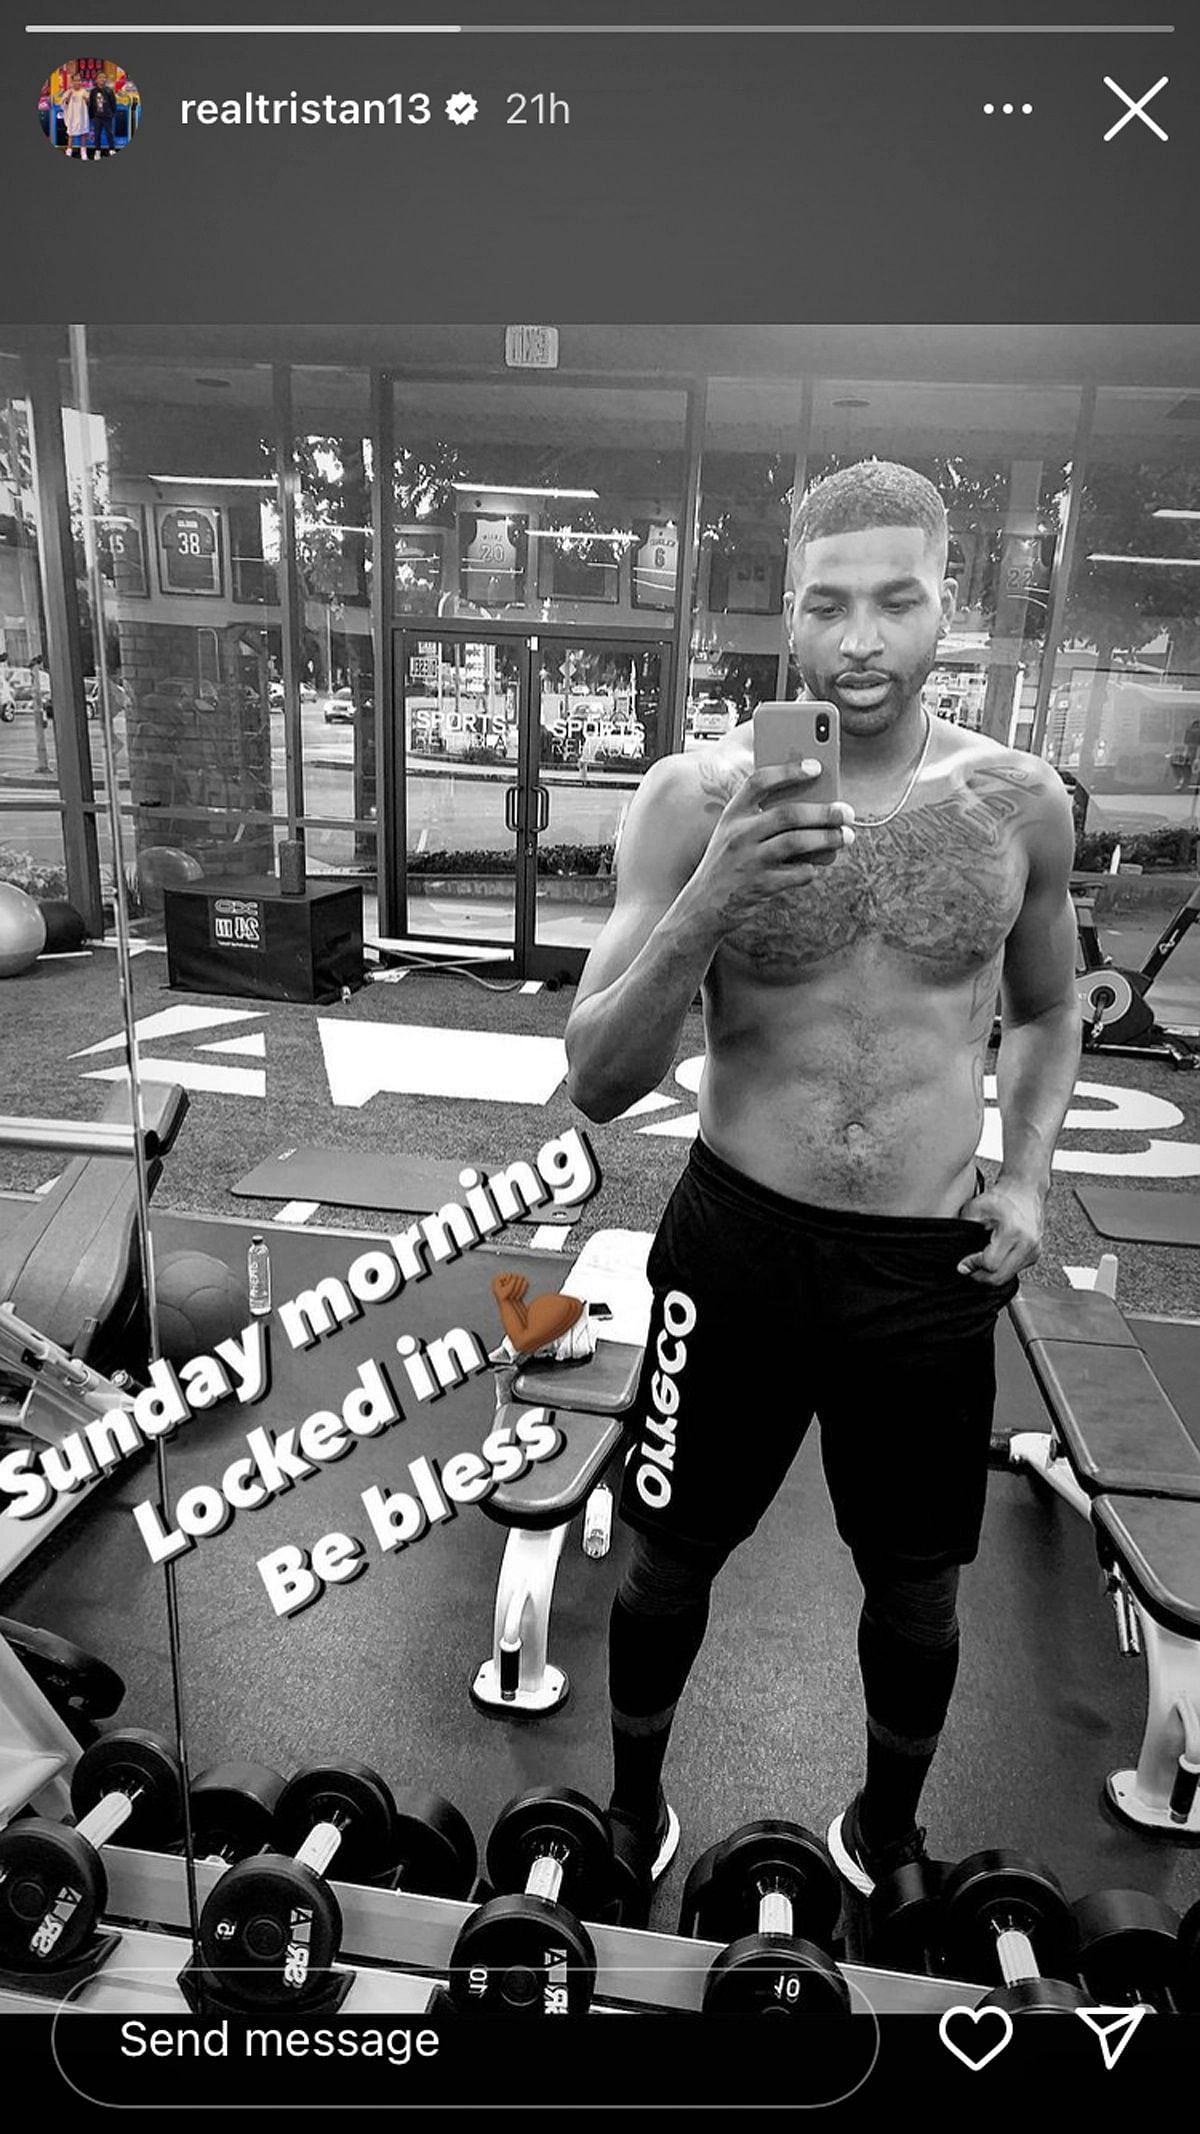 Thompson&#039;s gym selfie was most likely a reaction to Khloe&#039;s picture (Image via realtristan13 / Instagram)